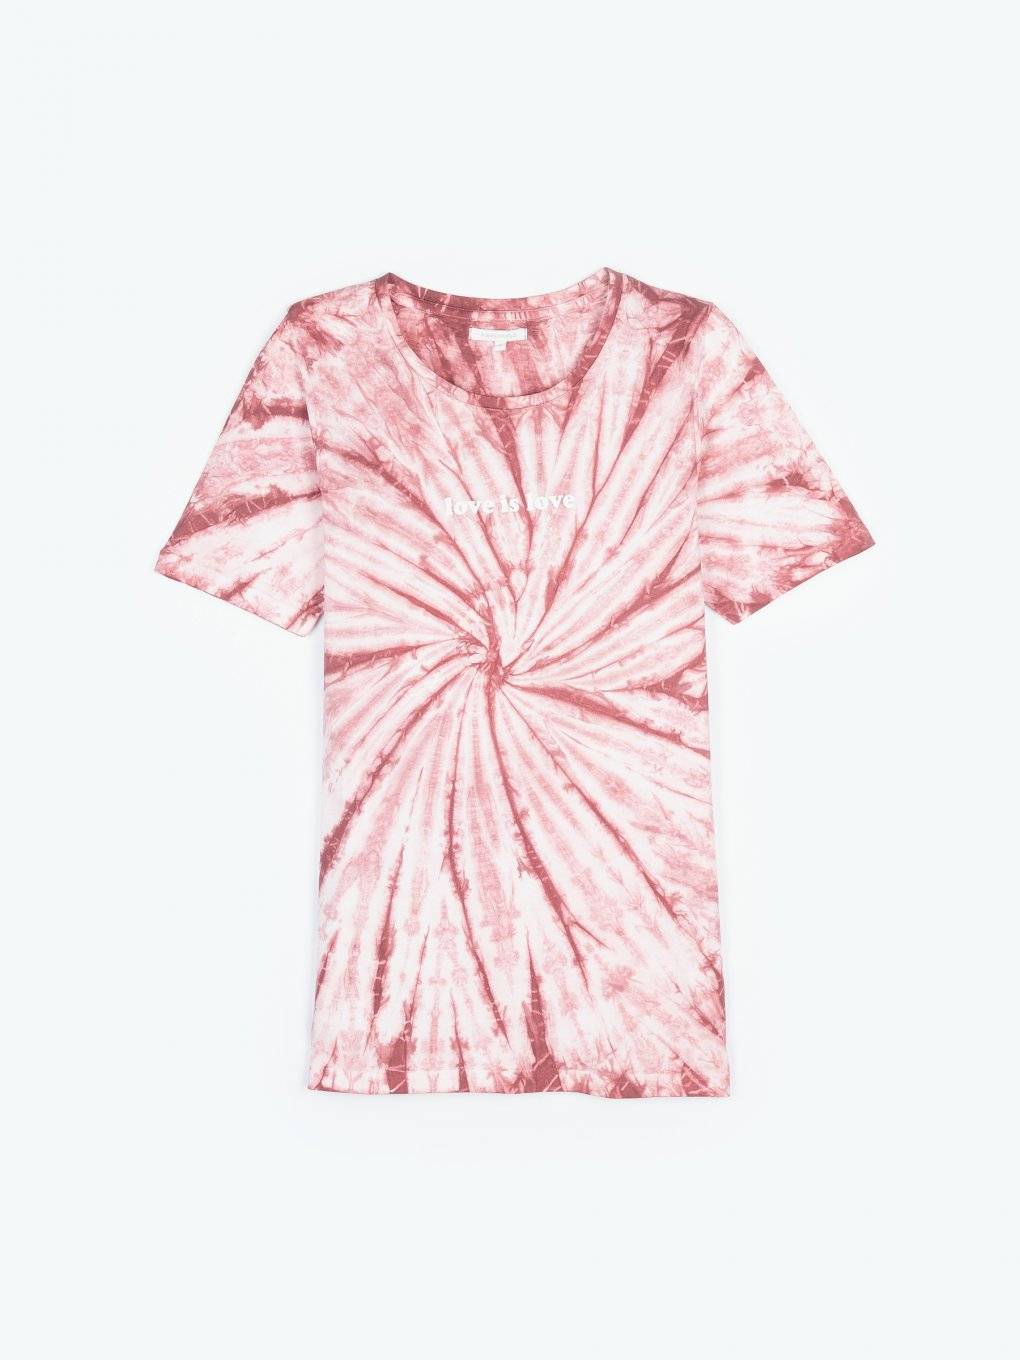 Tie dye top with print